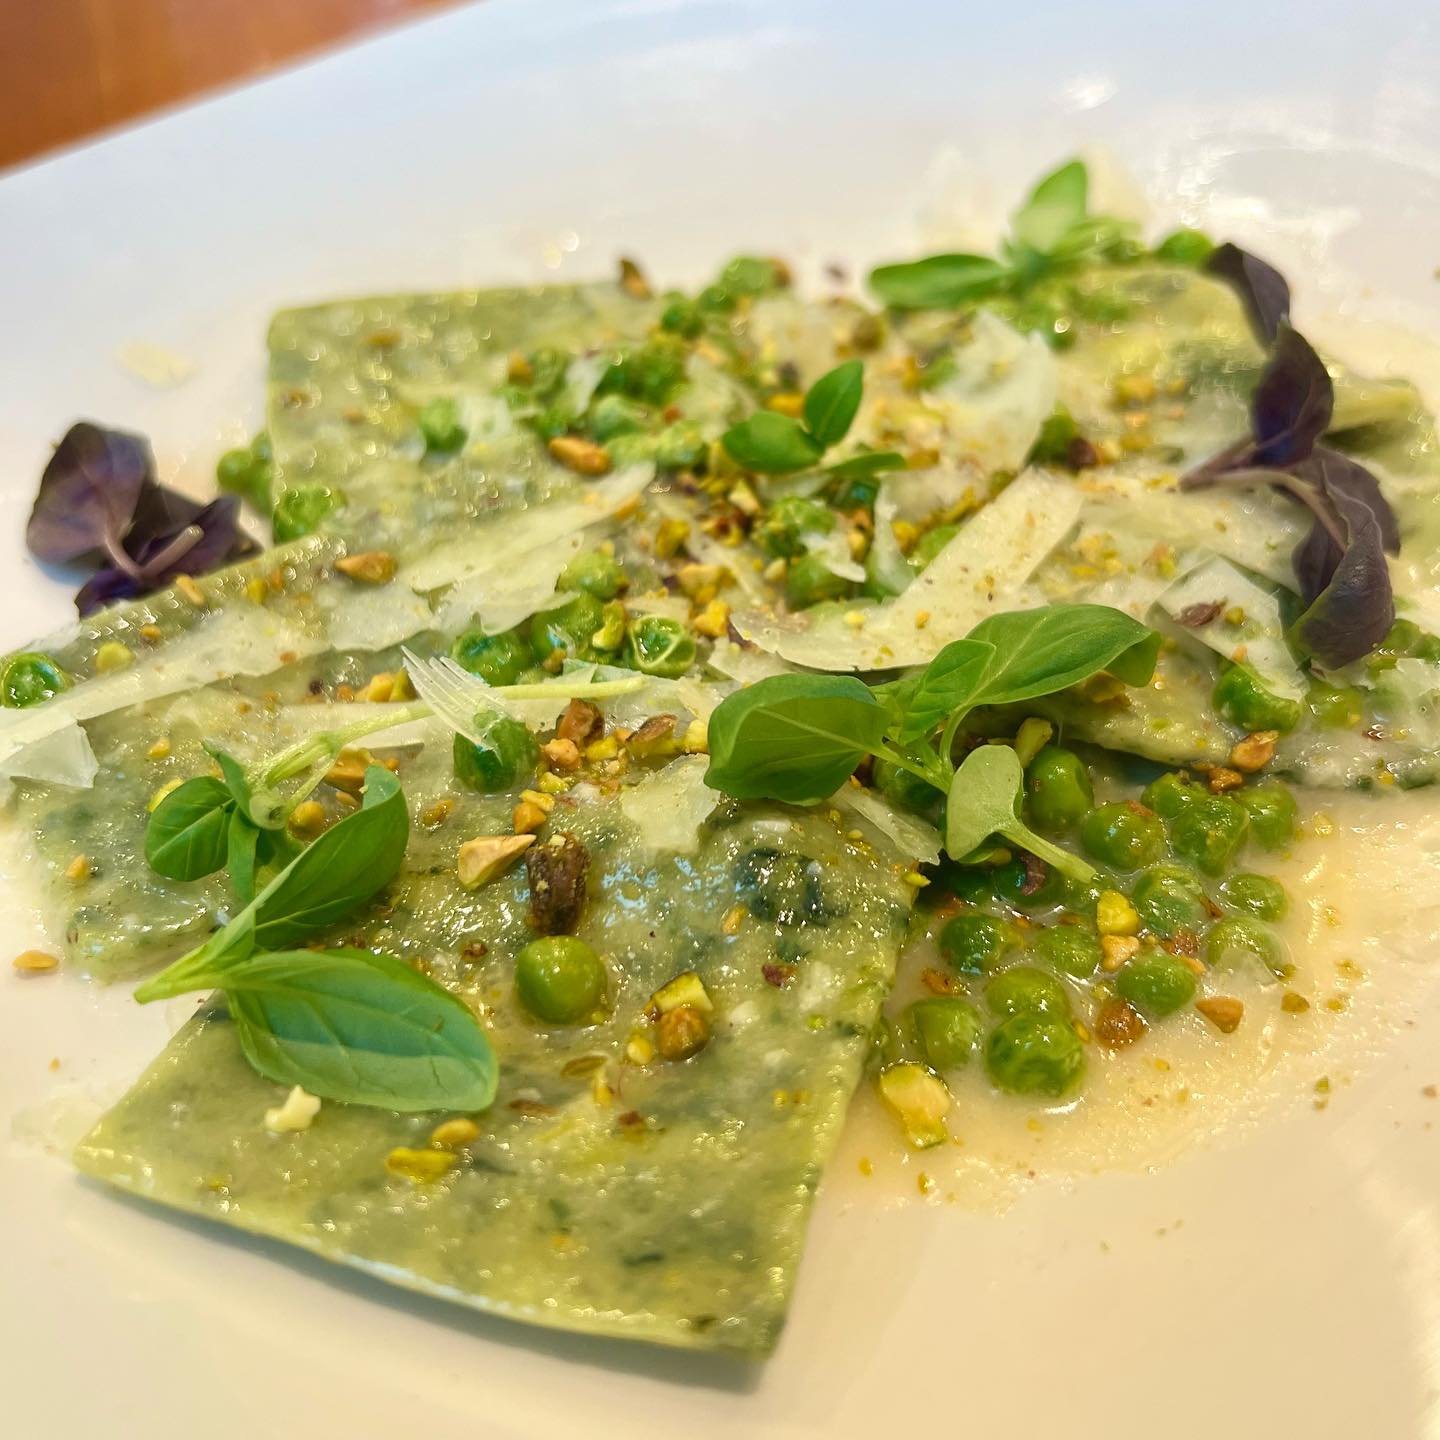 🎉Presenting NEW mouth watering additions to the Boat Bar menu 😋 Homemade Spinach Ricotta Ravioli &amp; Homemade Hummus with seasonal vegetables, grilled pita and crackers. Members- dine with us Wednesday-Saturday 5:30pm-8:30pm!

Stay tuned for our 